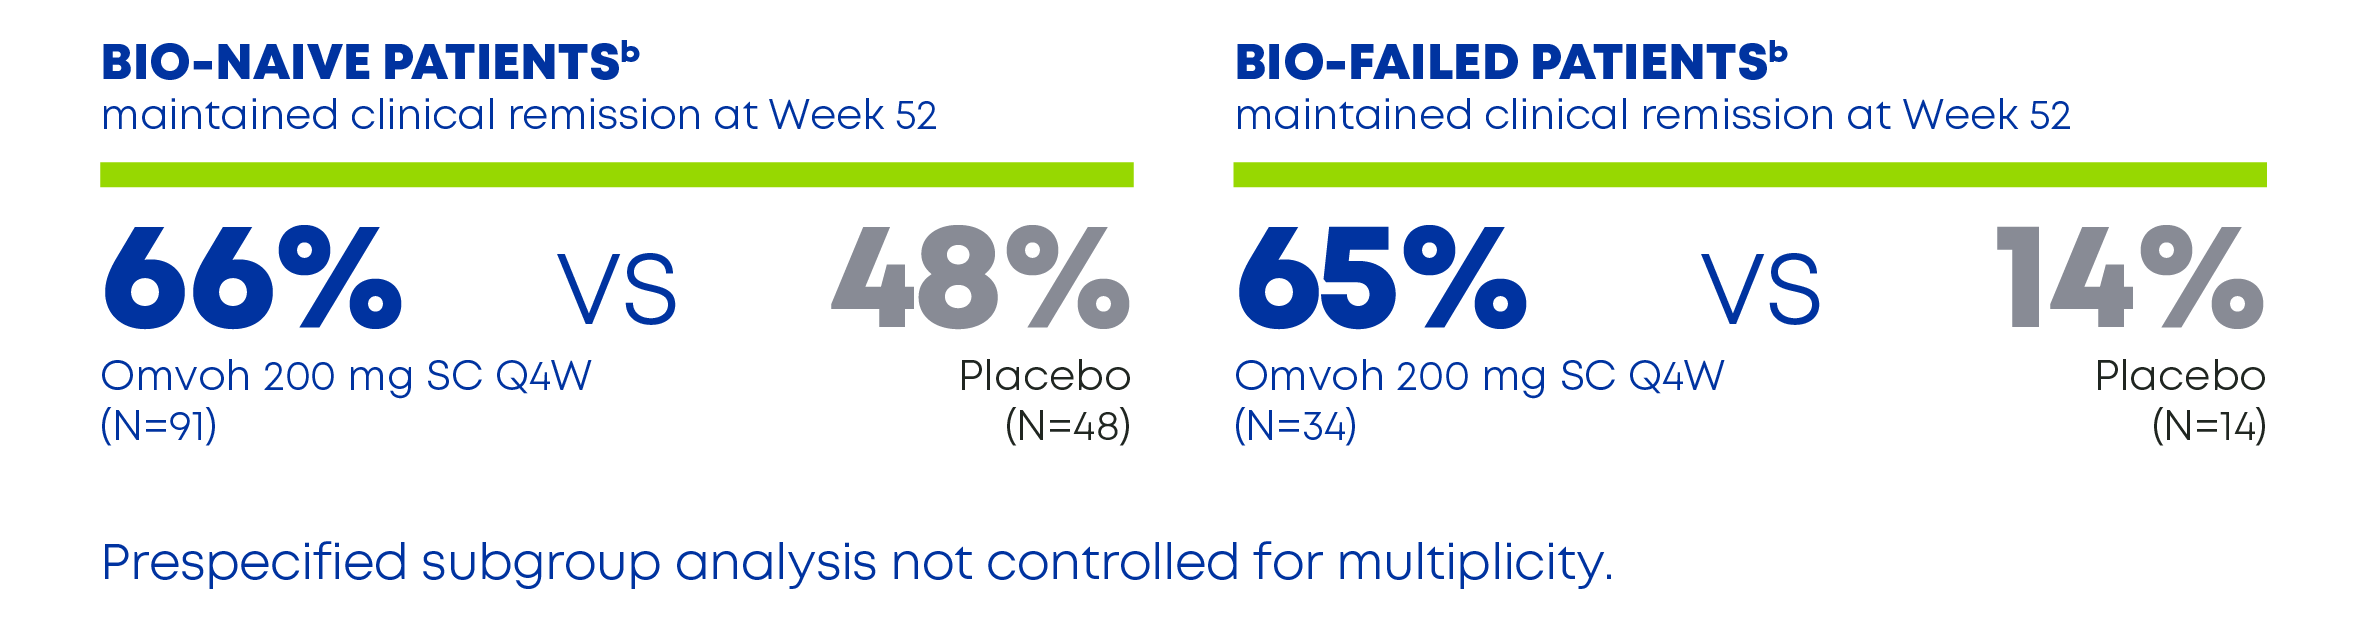 Bio-naive and Bio-failed Patients Maintained Clinical Remission at Week 52.